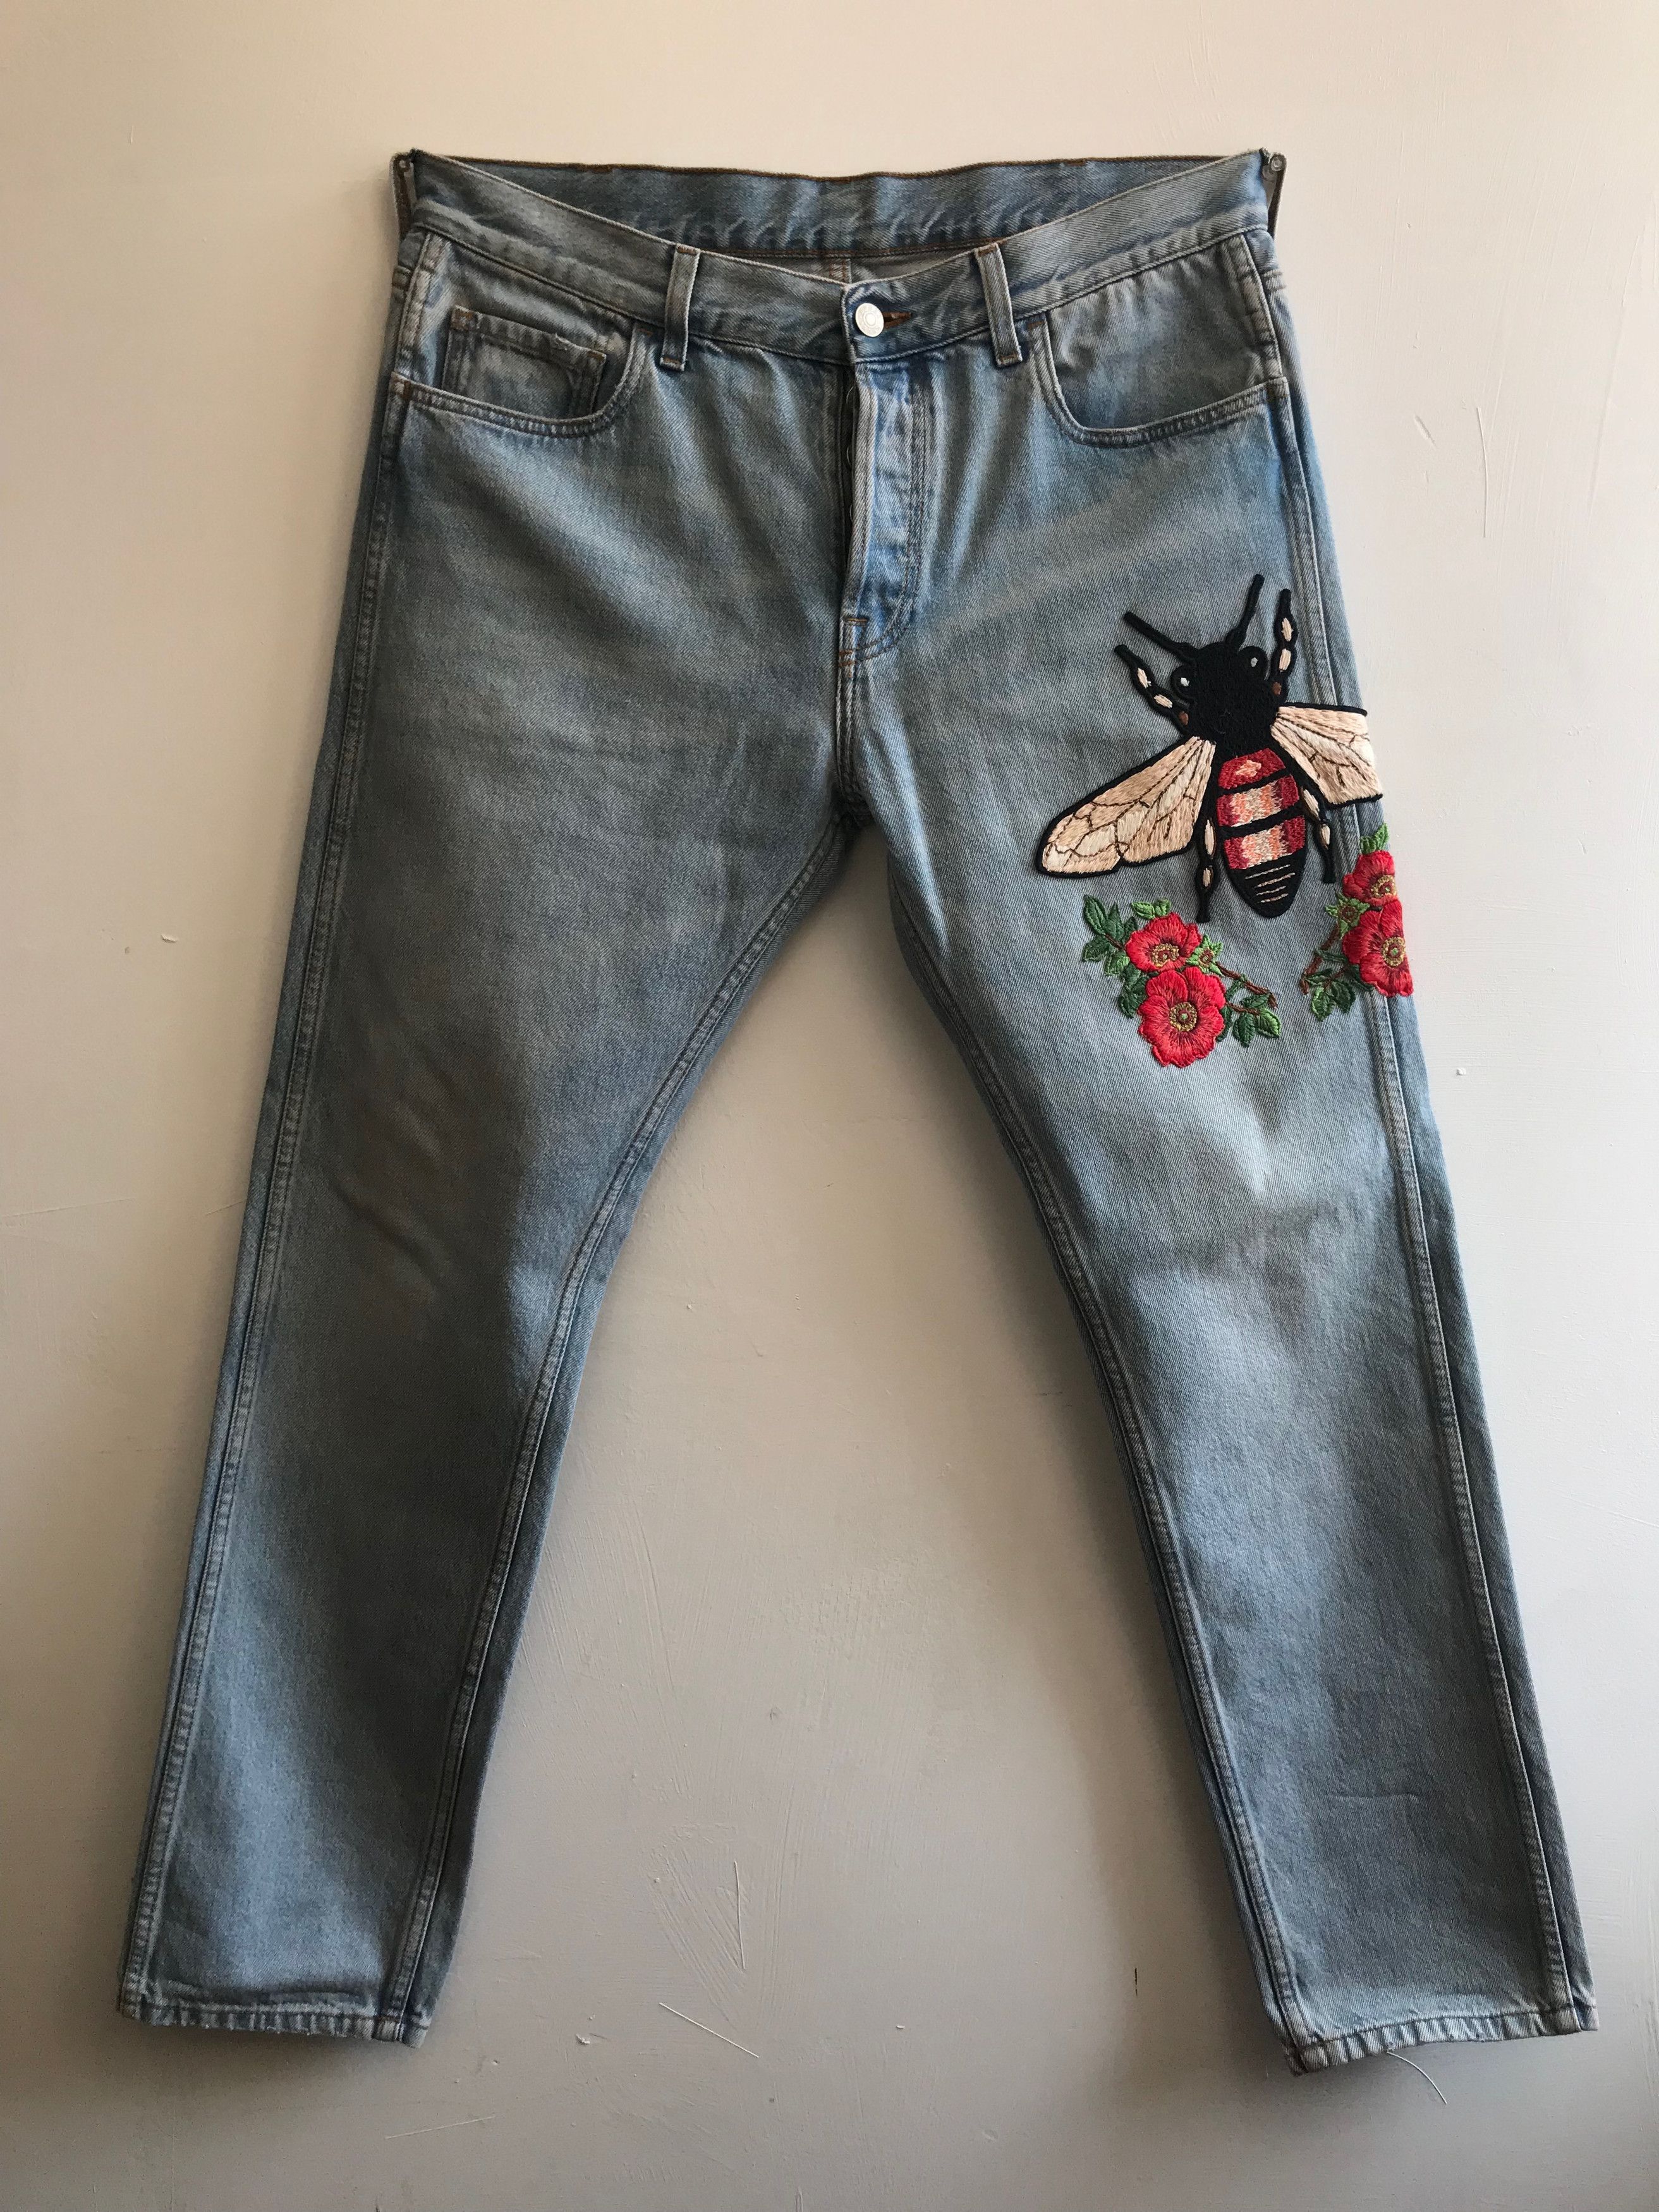 Gucci Blue Denim Floral Bee Embroidered Tapered Jeans M Gucci